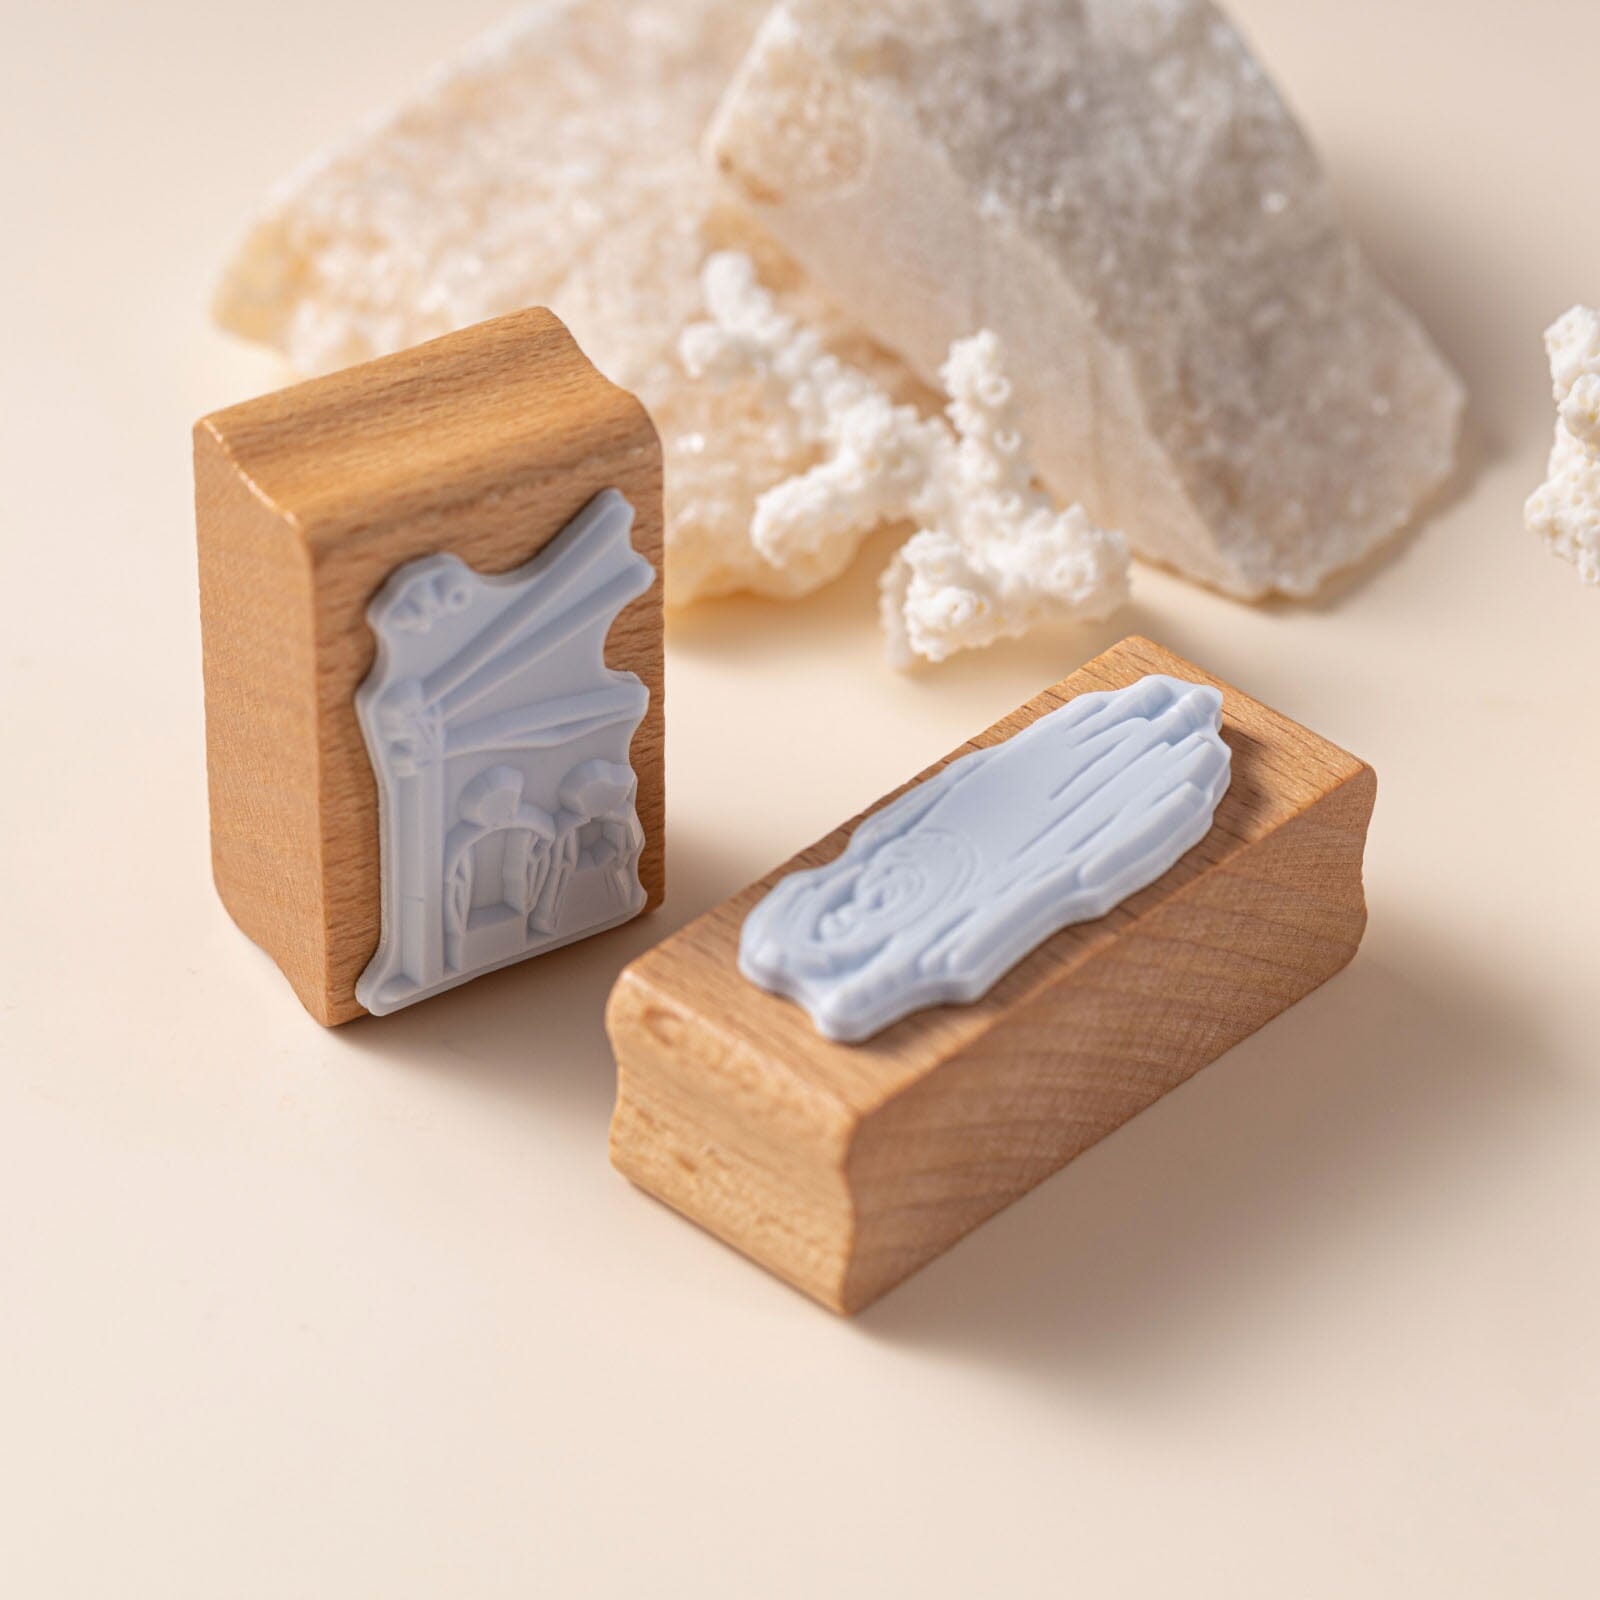 Hinoki - ‘Into the Wave’ Wooden Stamps Set